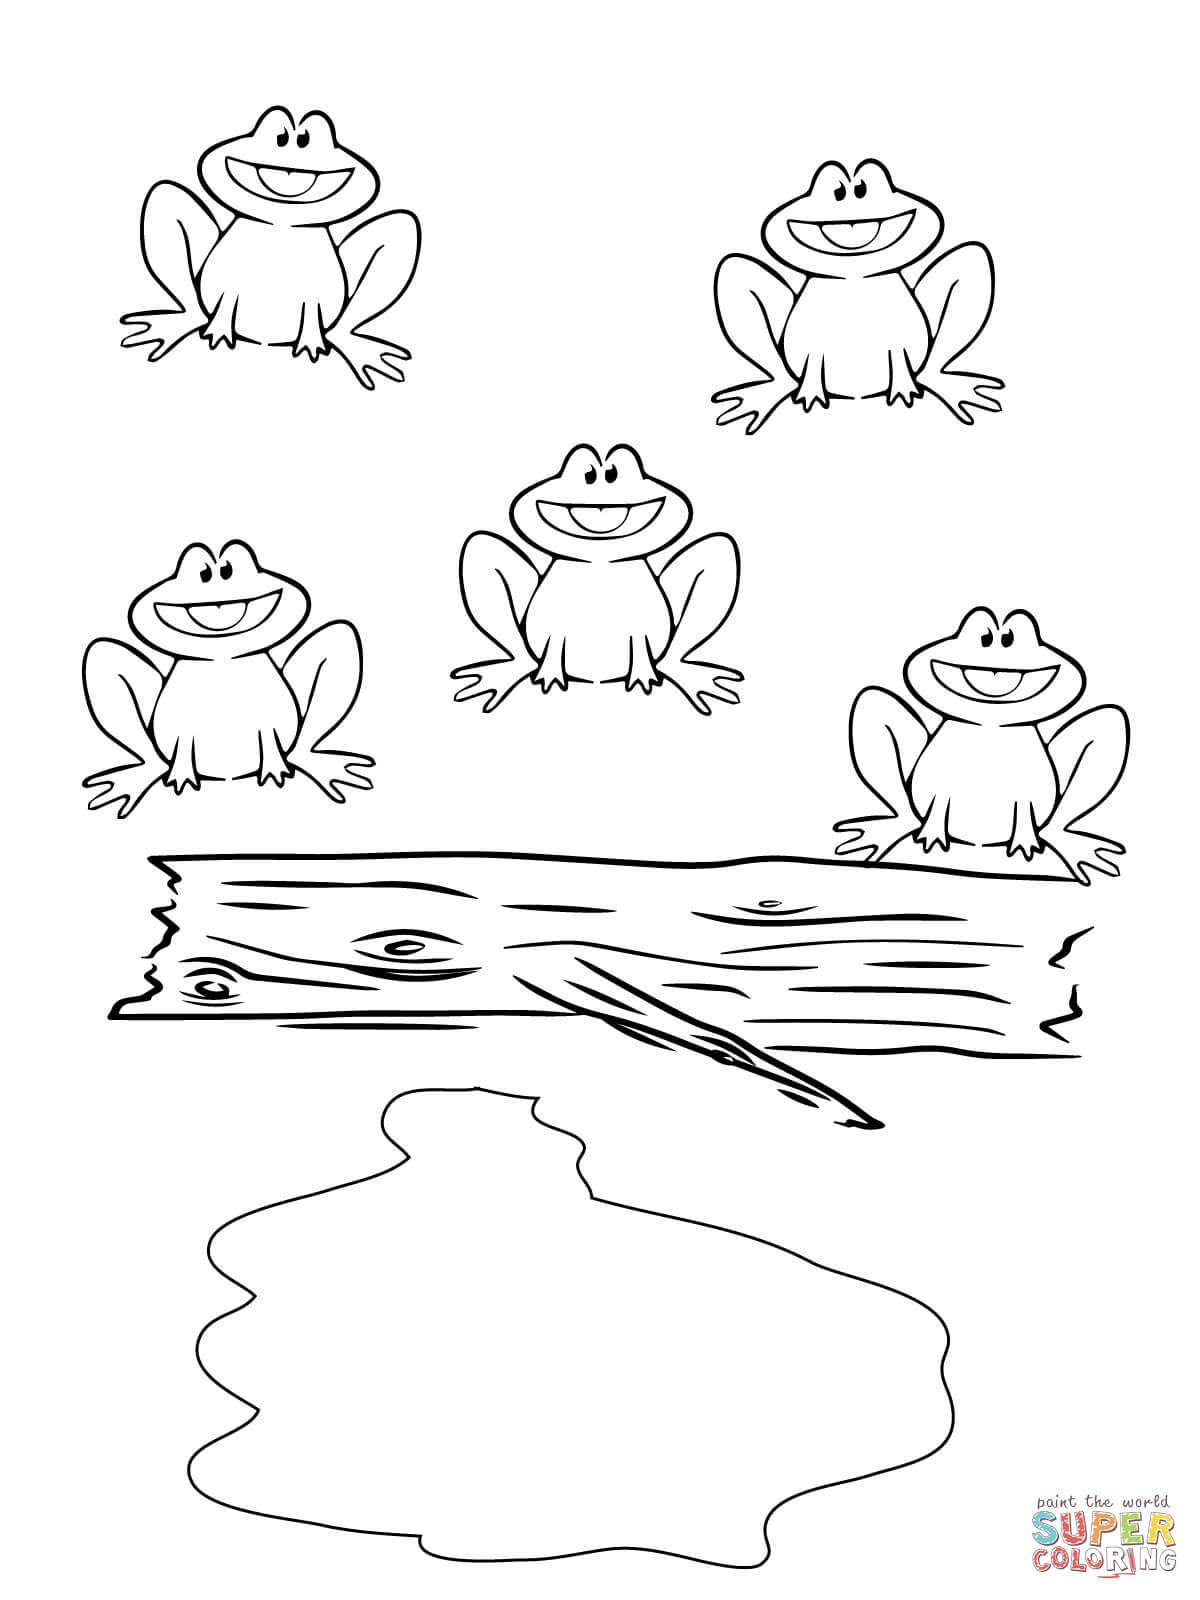 Five Little Speckled Frogs Coloring Page | Free Printable Coloring Pages - Printable Frog Puzzle